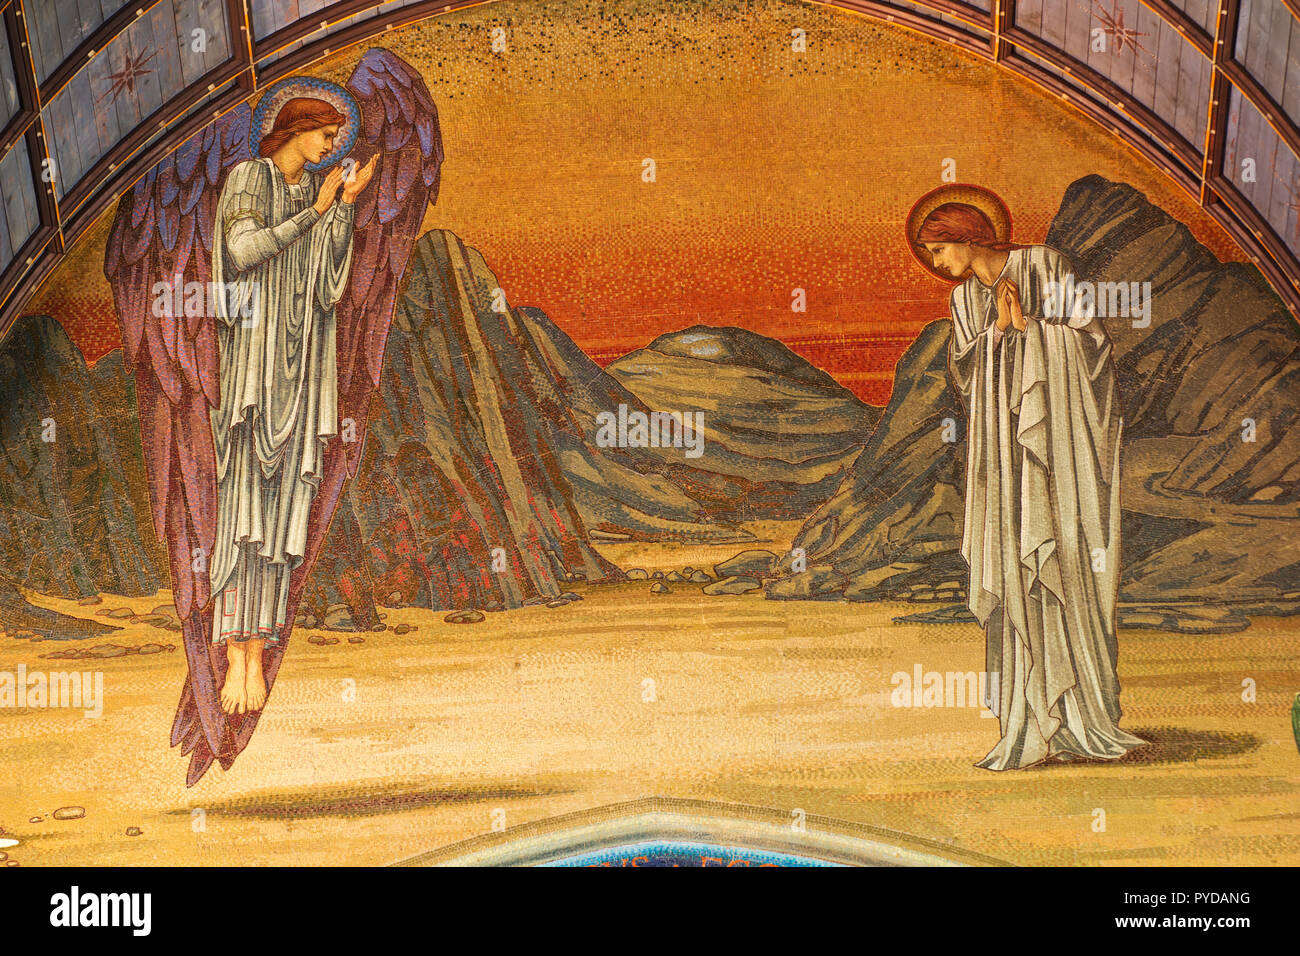 Annunciation (by Edward Burne-Jones) - St Paul's Within the Walls - Rome Stock Photo